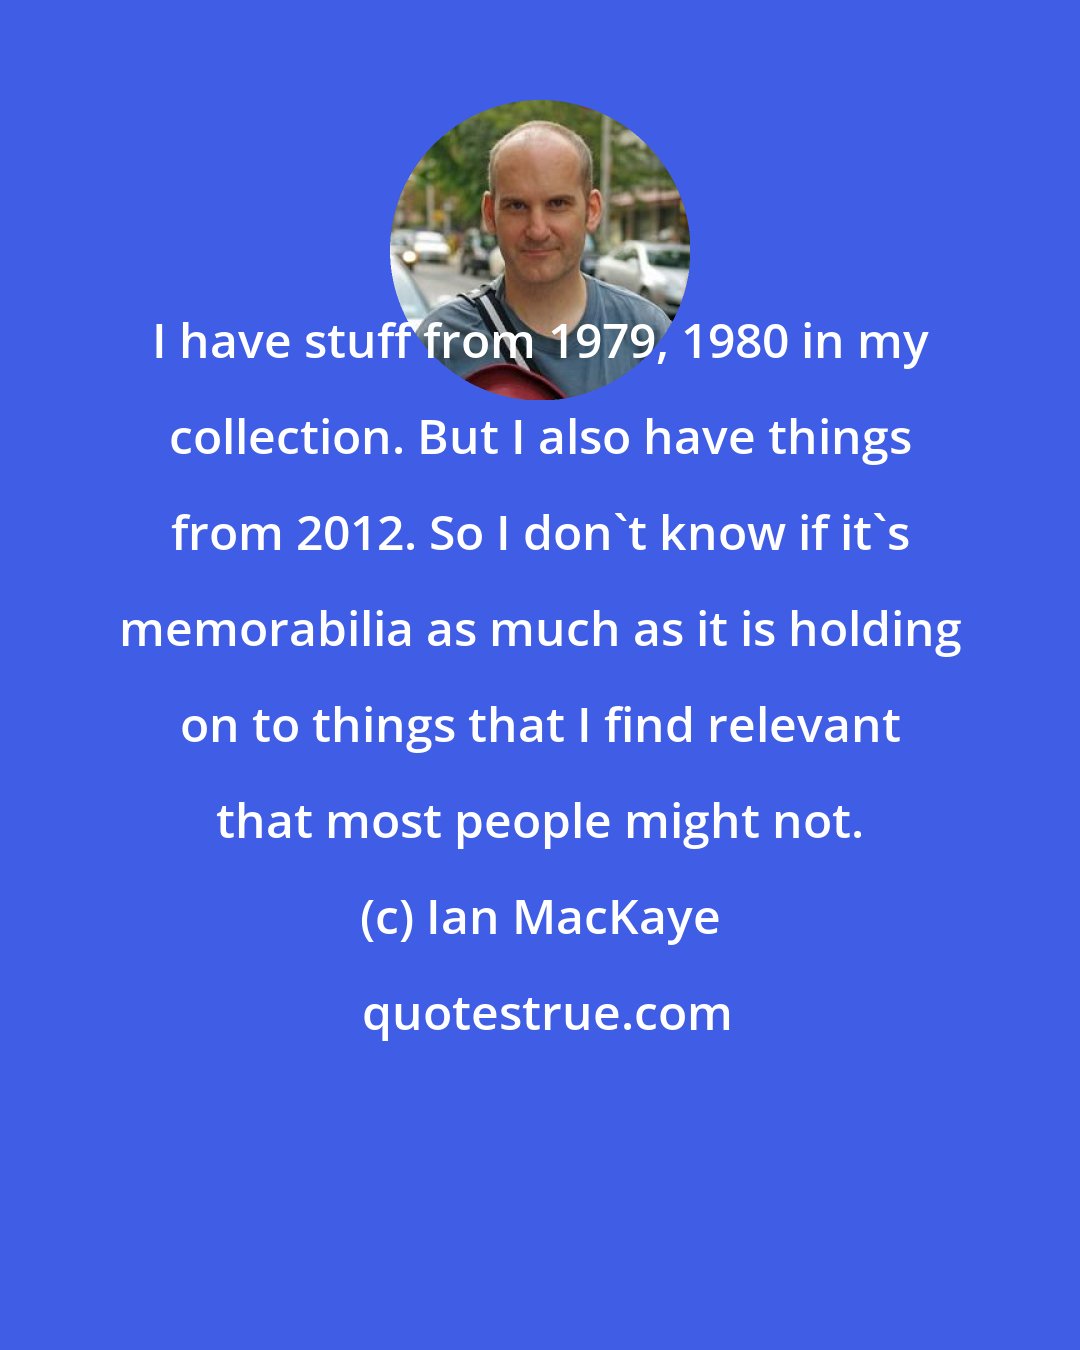 Ian MacKaye: I have stuff from 1979, 1980 in my collection. But I also have things from 2012. So I don't know if it's memorabilia as much as it is holding on to things that I find relevant that most people might not.